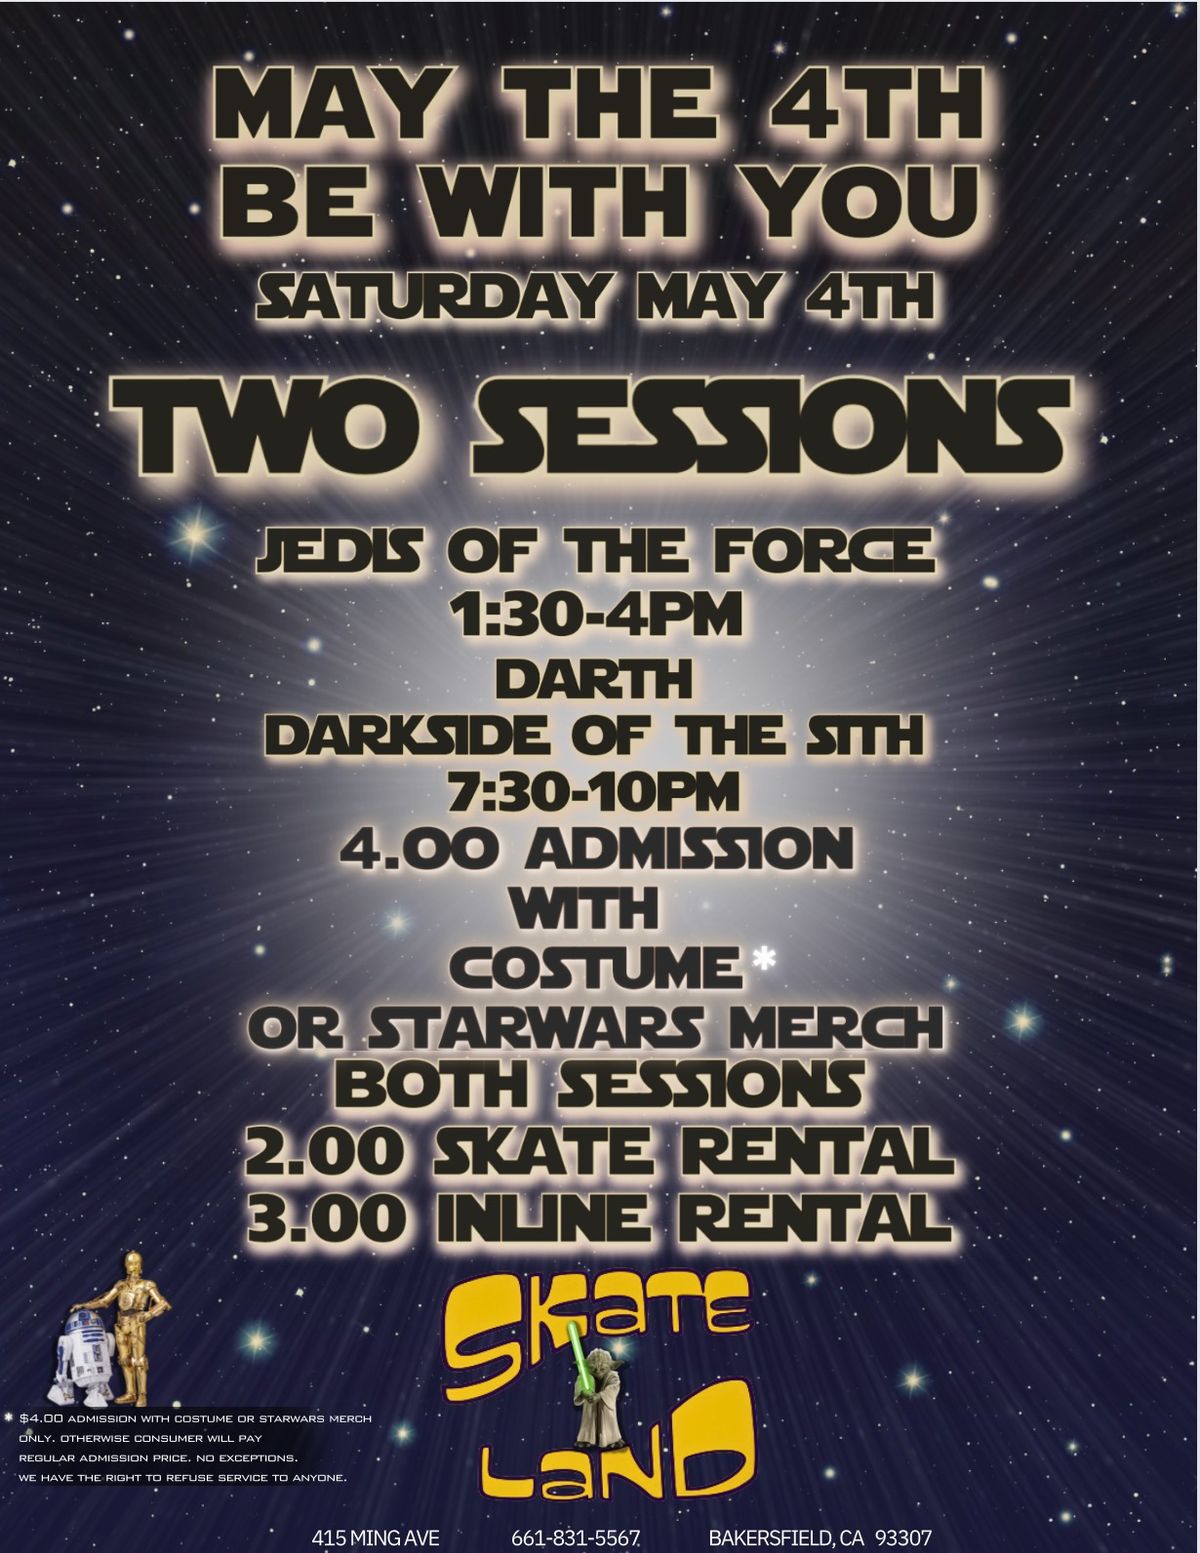 May the 4th Be With You Skate from 7:30-10pm